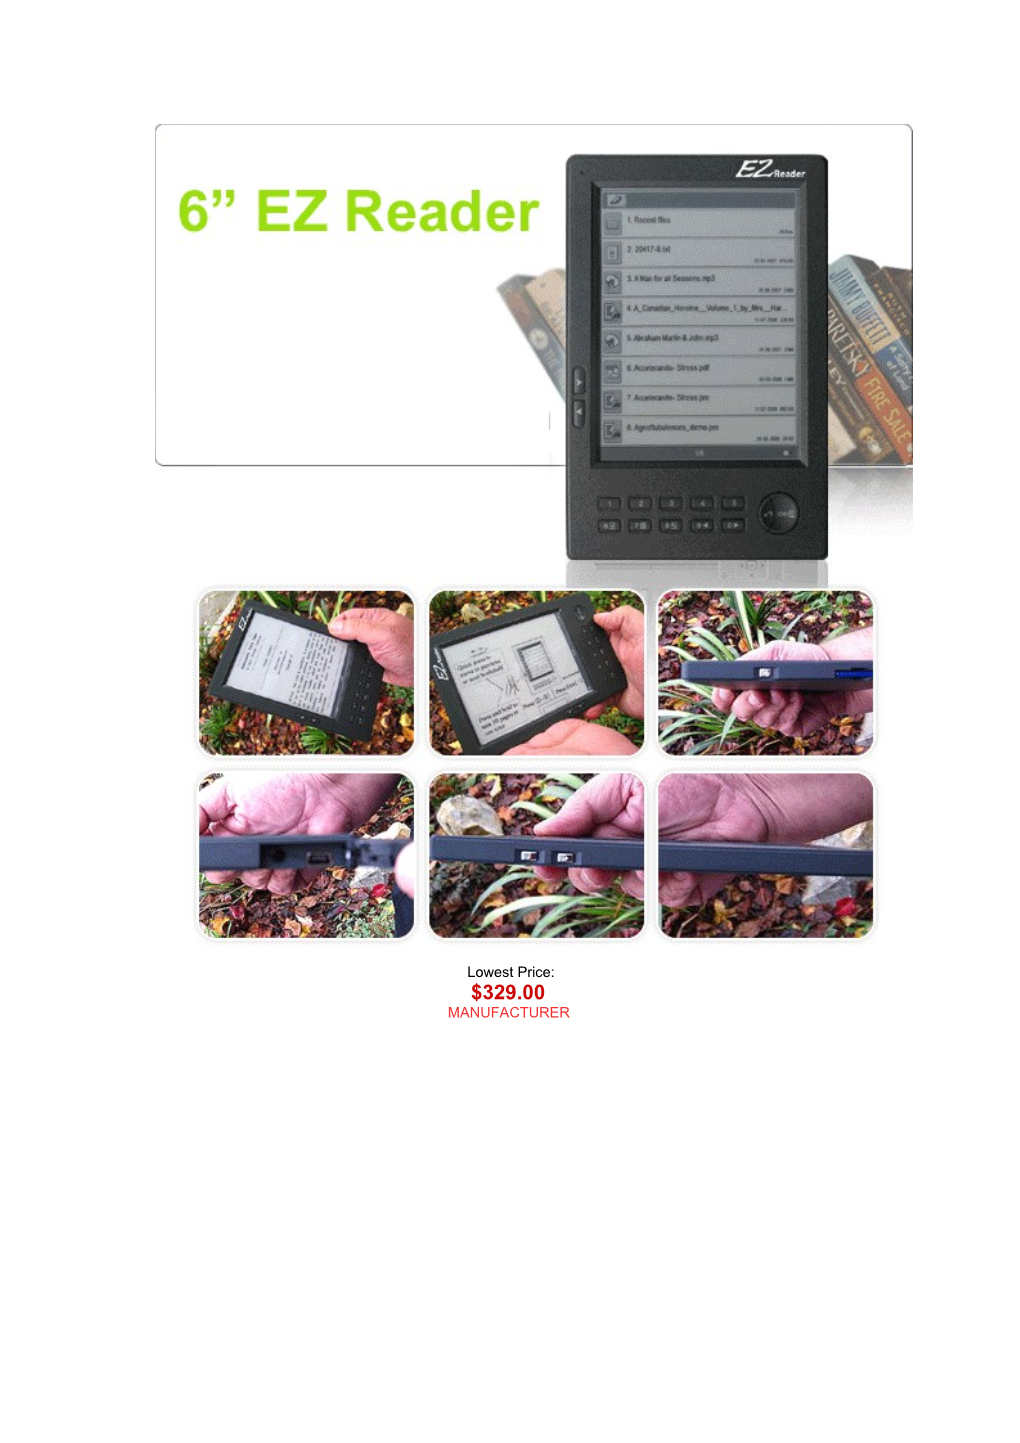 New EZ Reader, Distributed by Astak, Inc